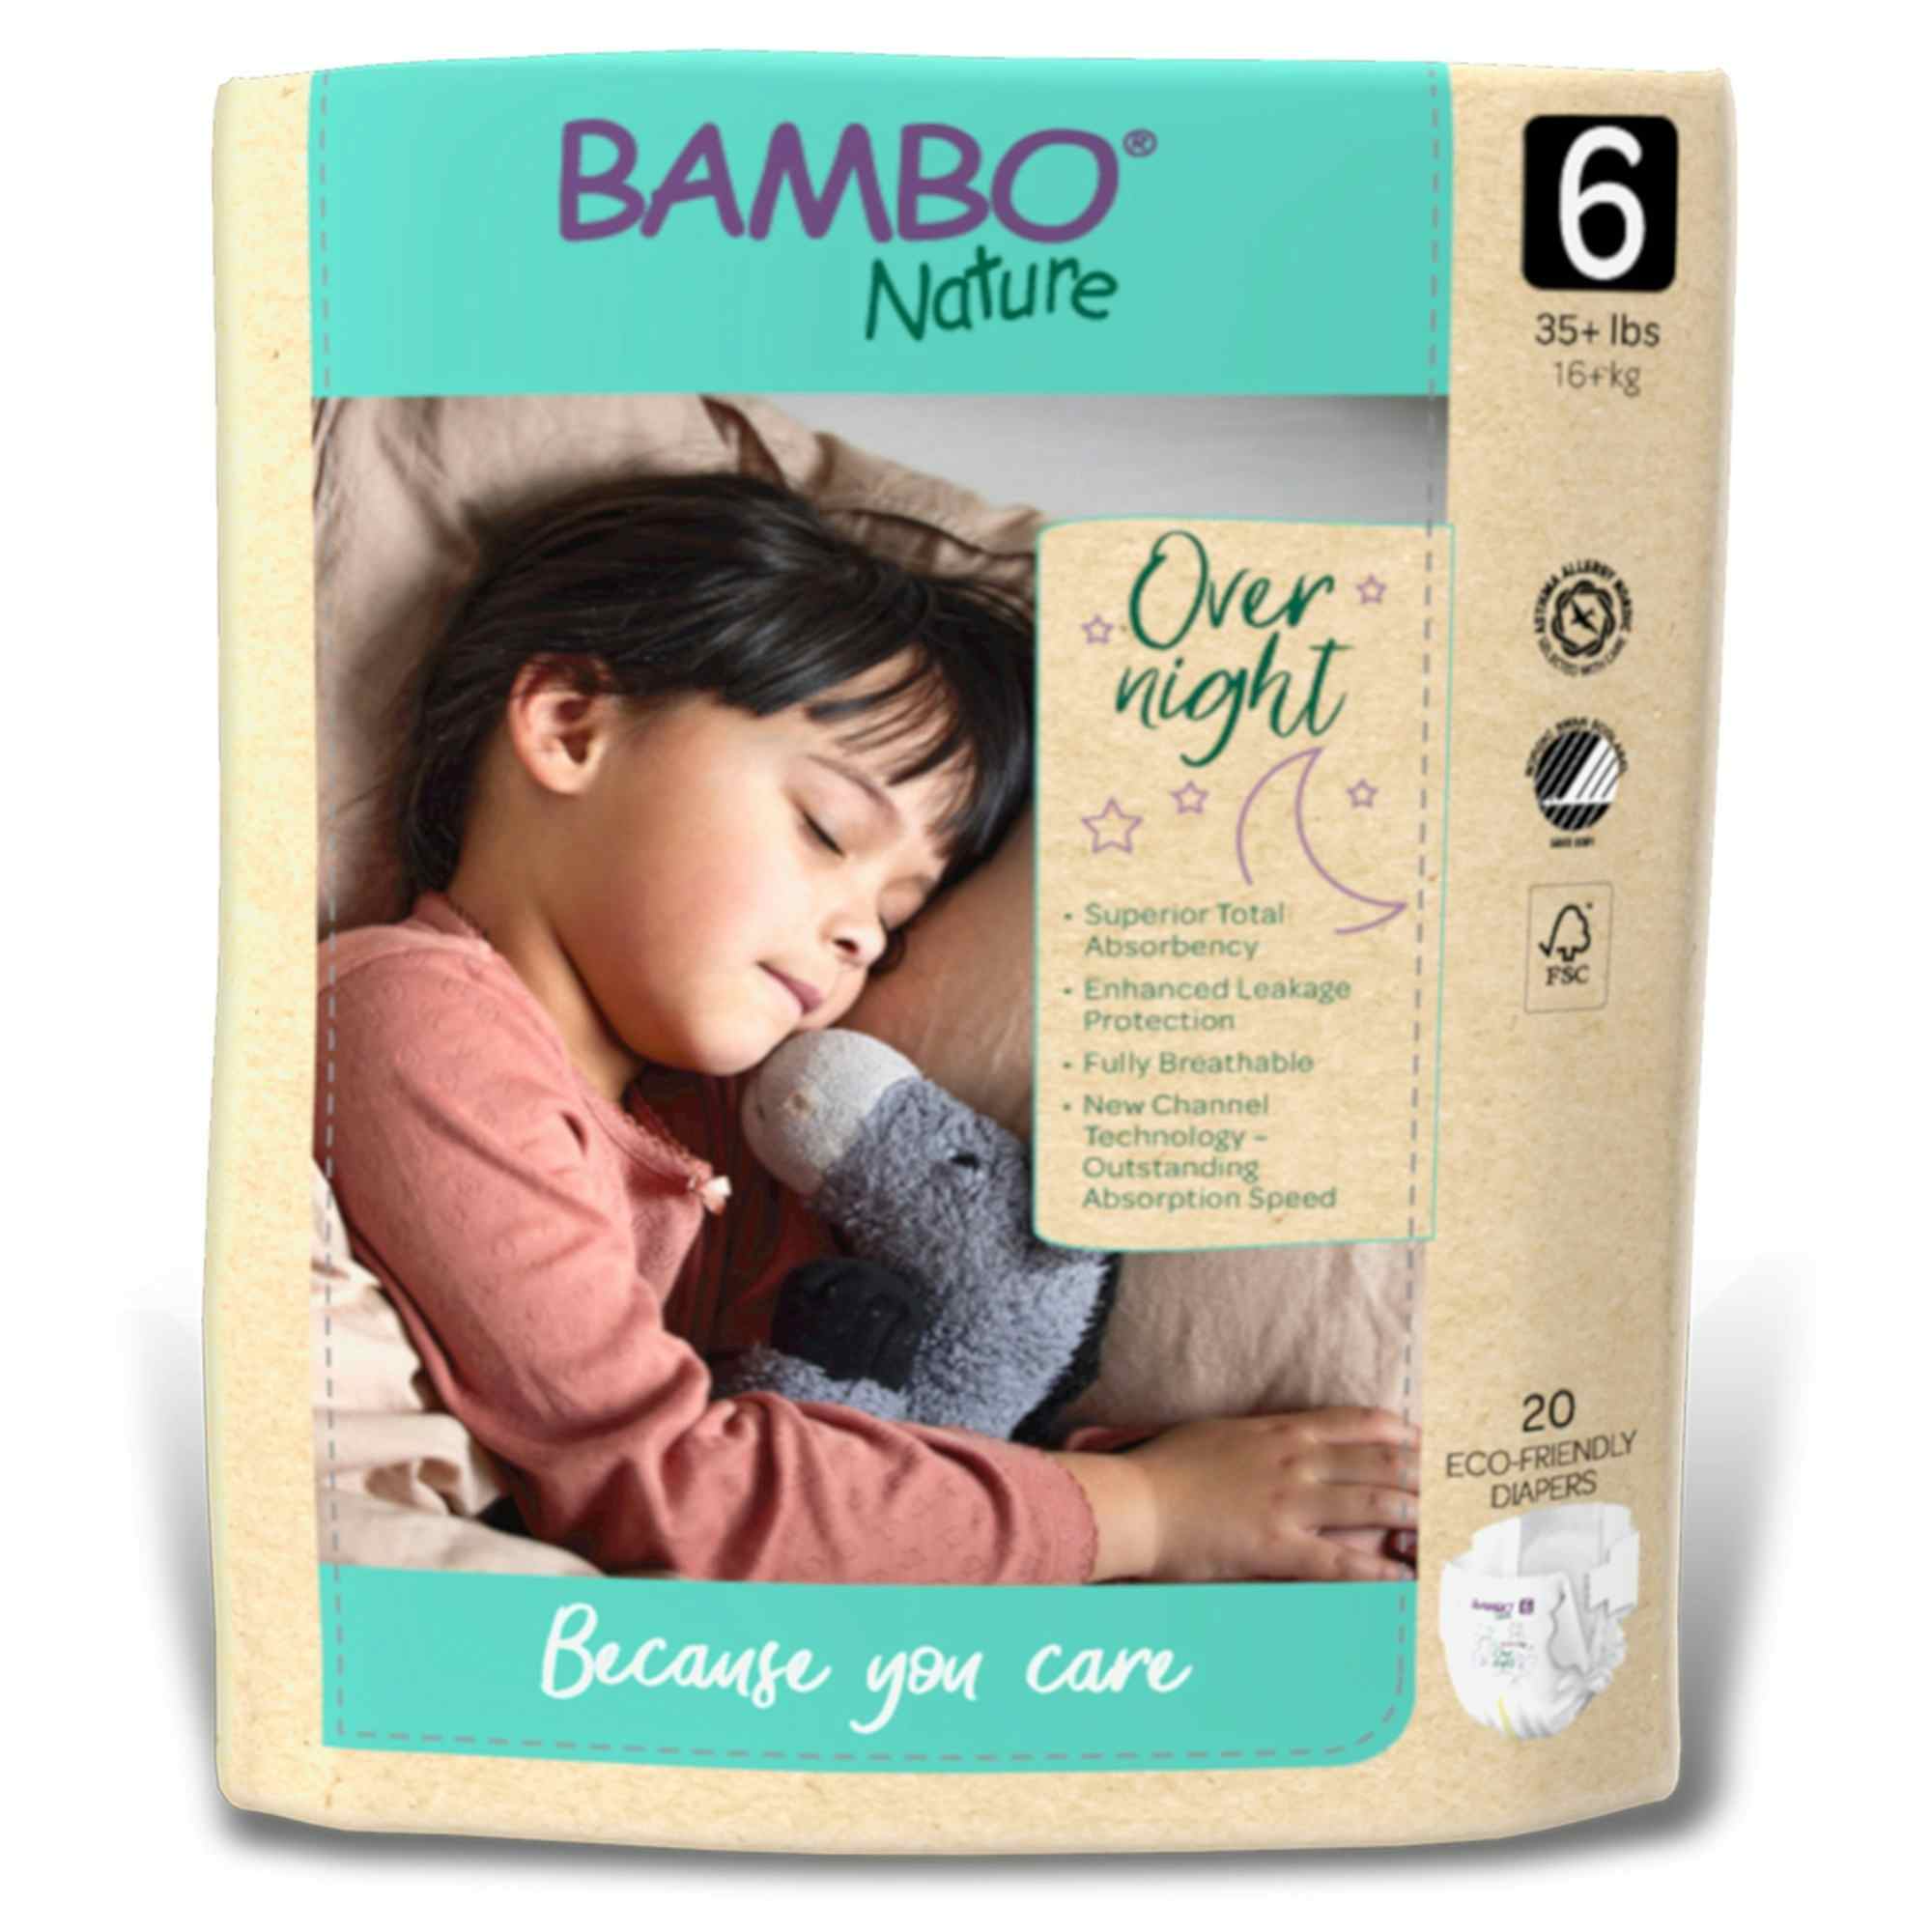 Bambo Nature Overnight Baby Diapers with Tabs, Heavy Absorbency, 1000021012, Size 6 (35 lbs. and Up) - Pack of 20